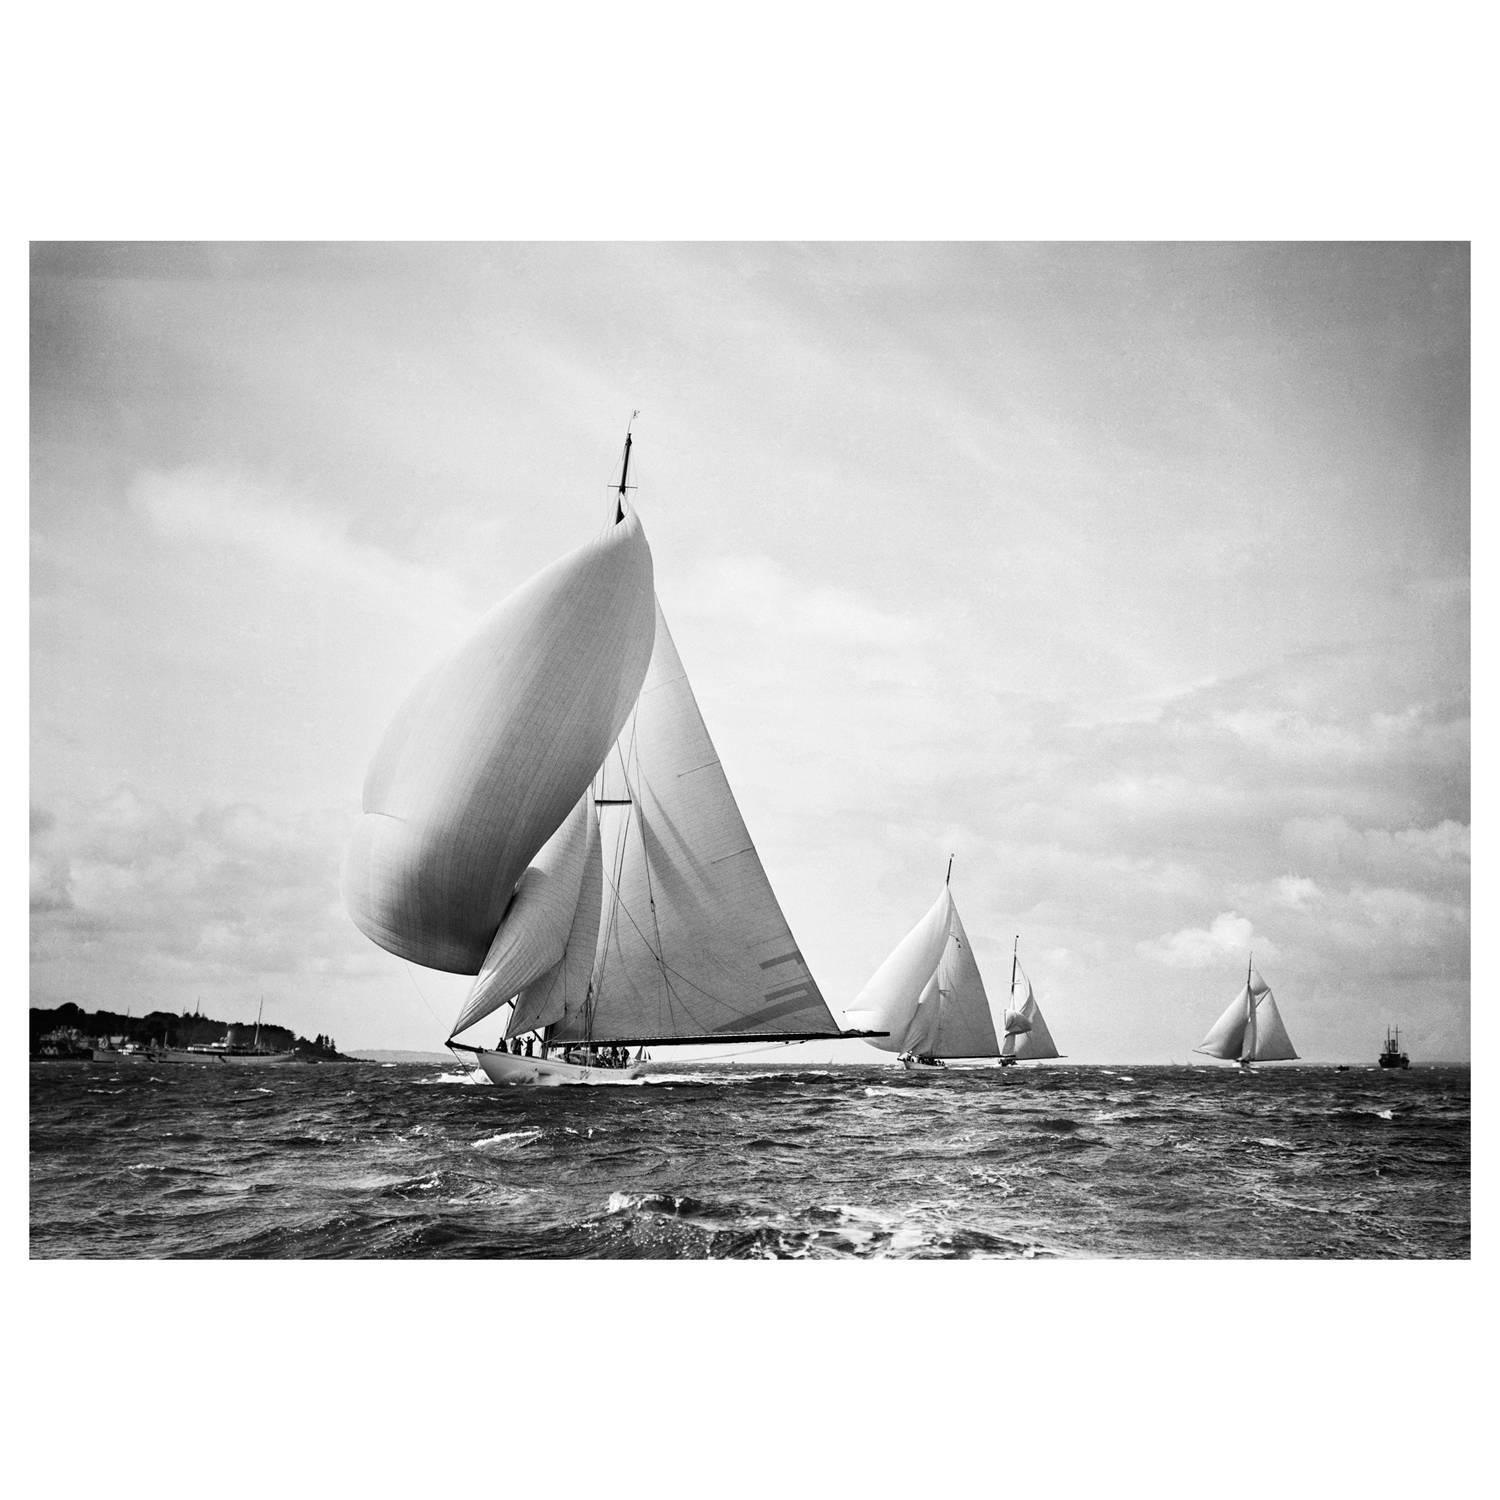 Frank Beken Black and White Photograph - Sailing Yacht Candida Leading, 7th August 1930 